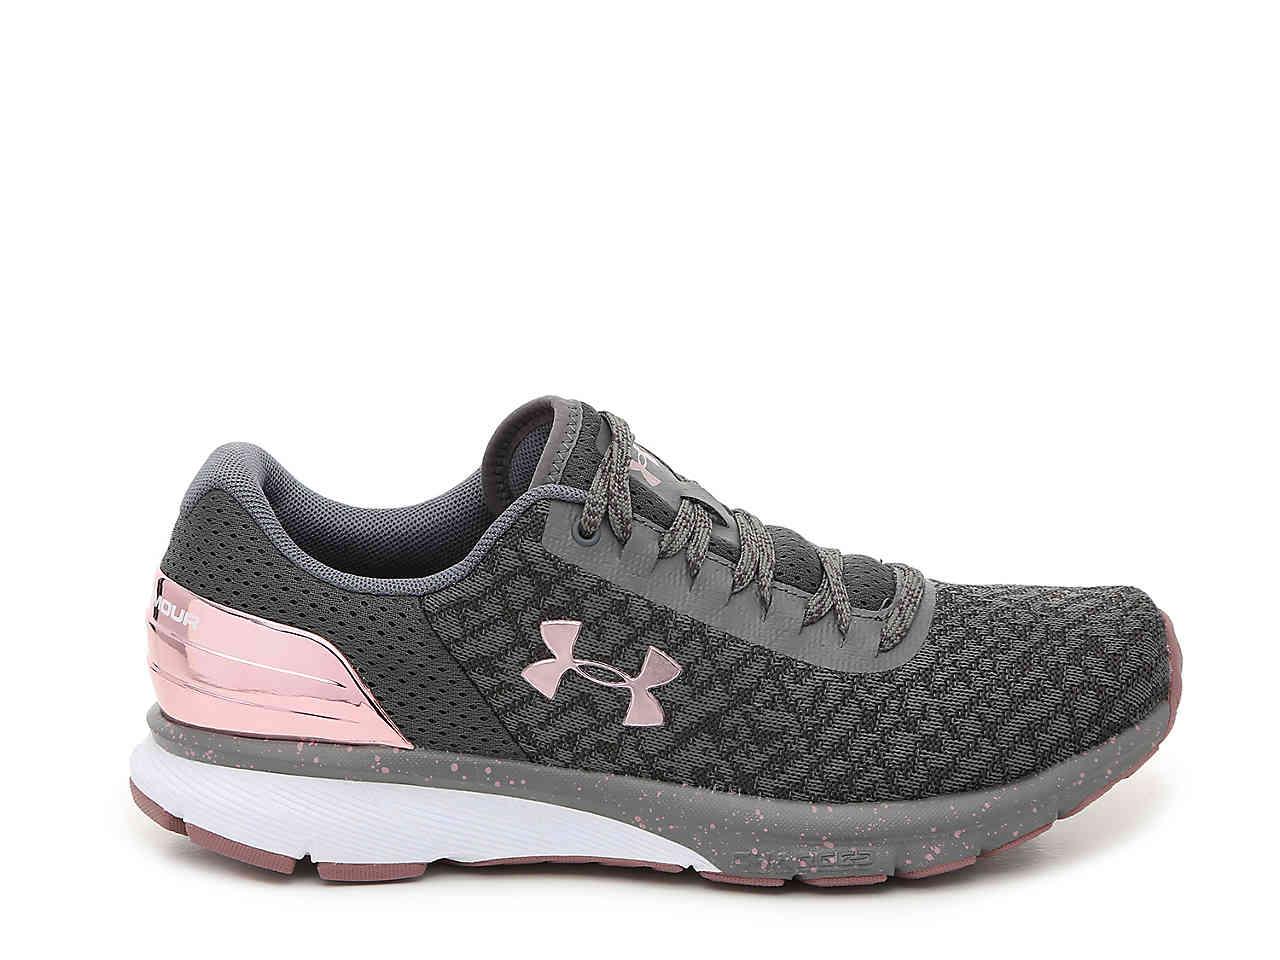 Under Armour Synthetic Charged Escape 2 Running Shoe in Grey/Rose Gold  Metallic (Gray) | Lyst